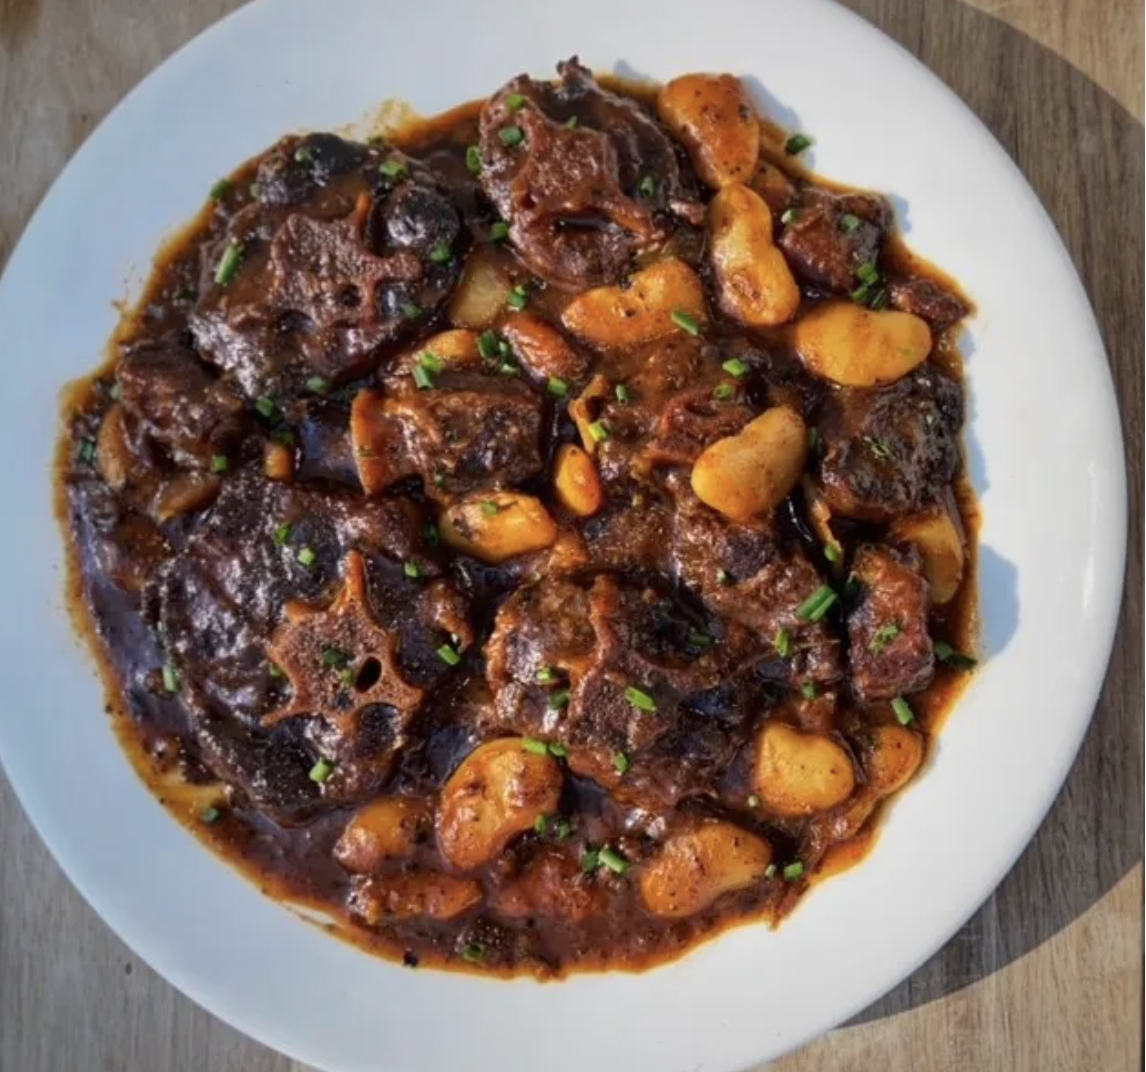 LARGE OXTAILS